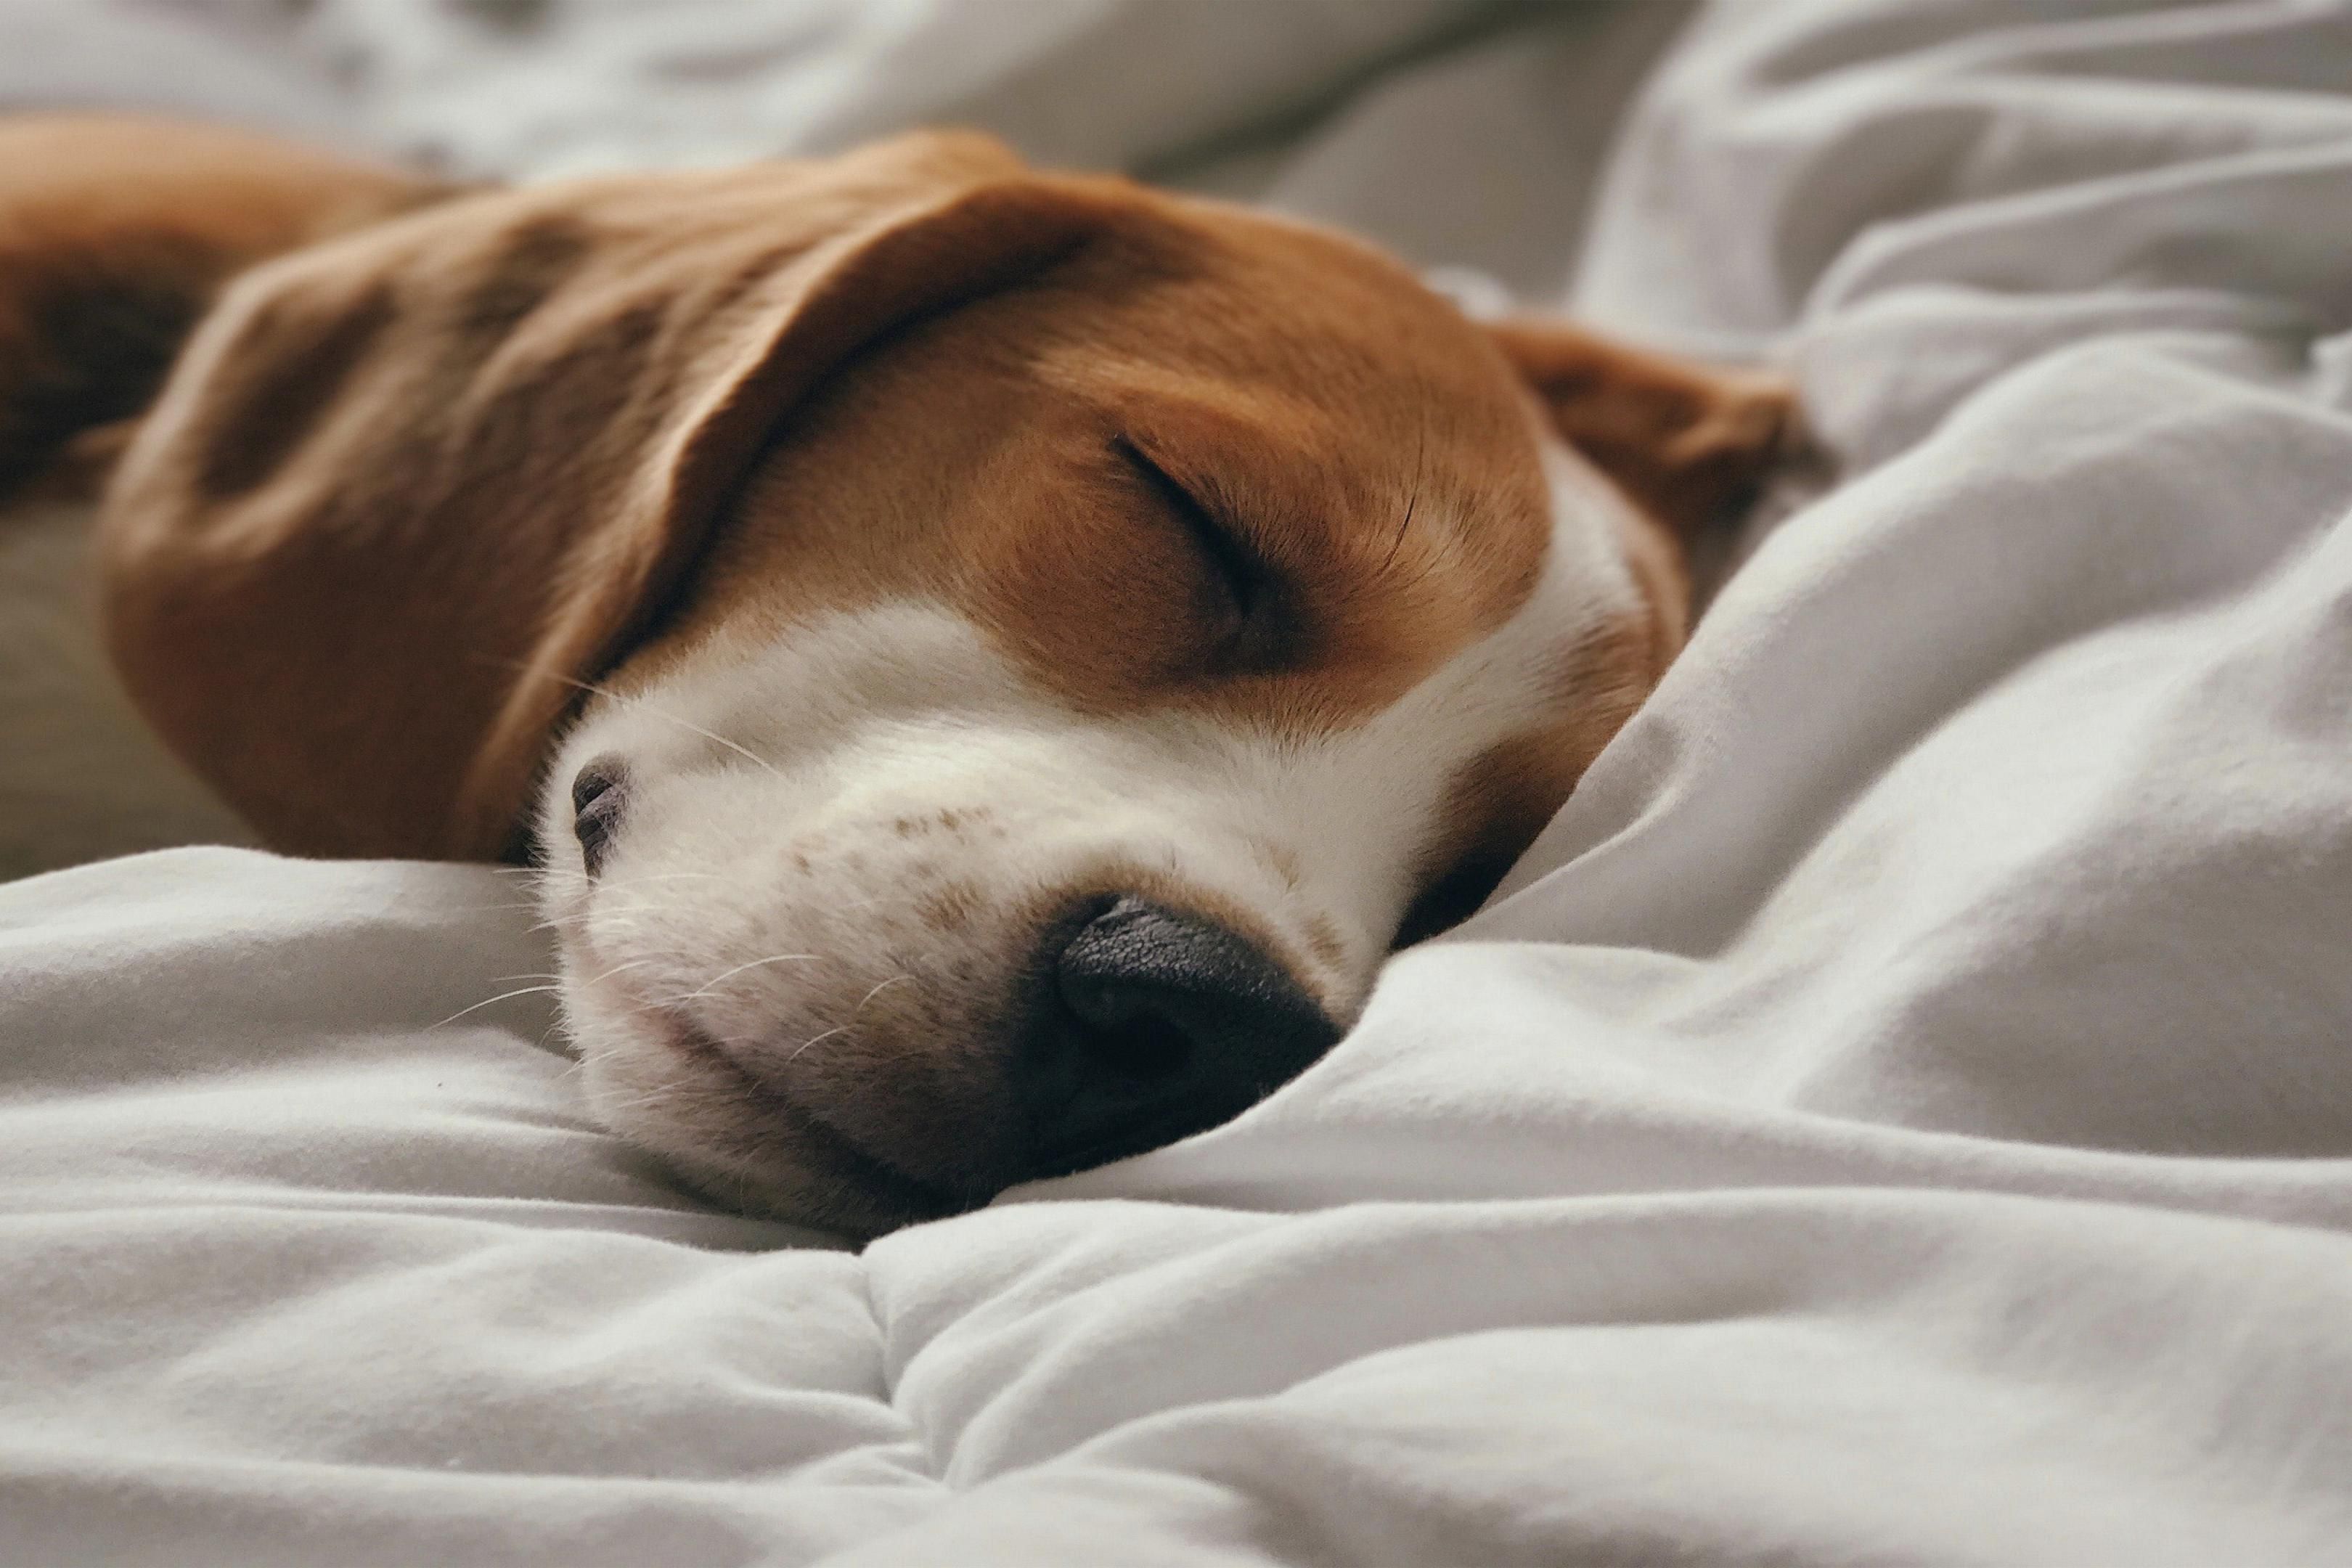 Furry friends are welcome!  We are proud to be a pet friendly property. Our large room sizes and outdoor green space make this an ideal location for pet owners. Pet fees apply, contact us for more details.